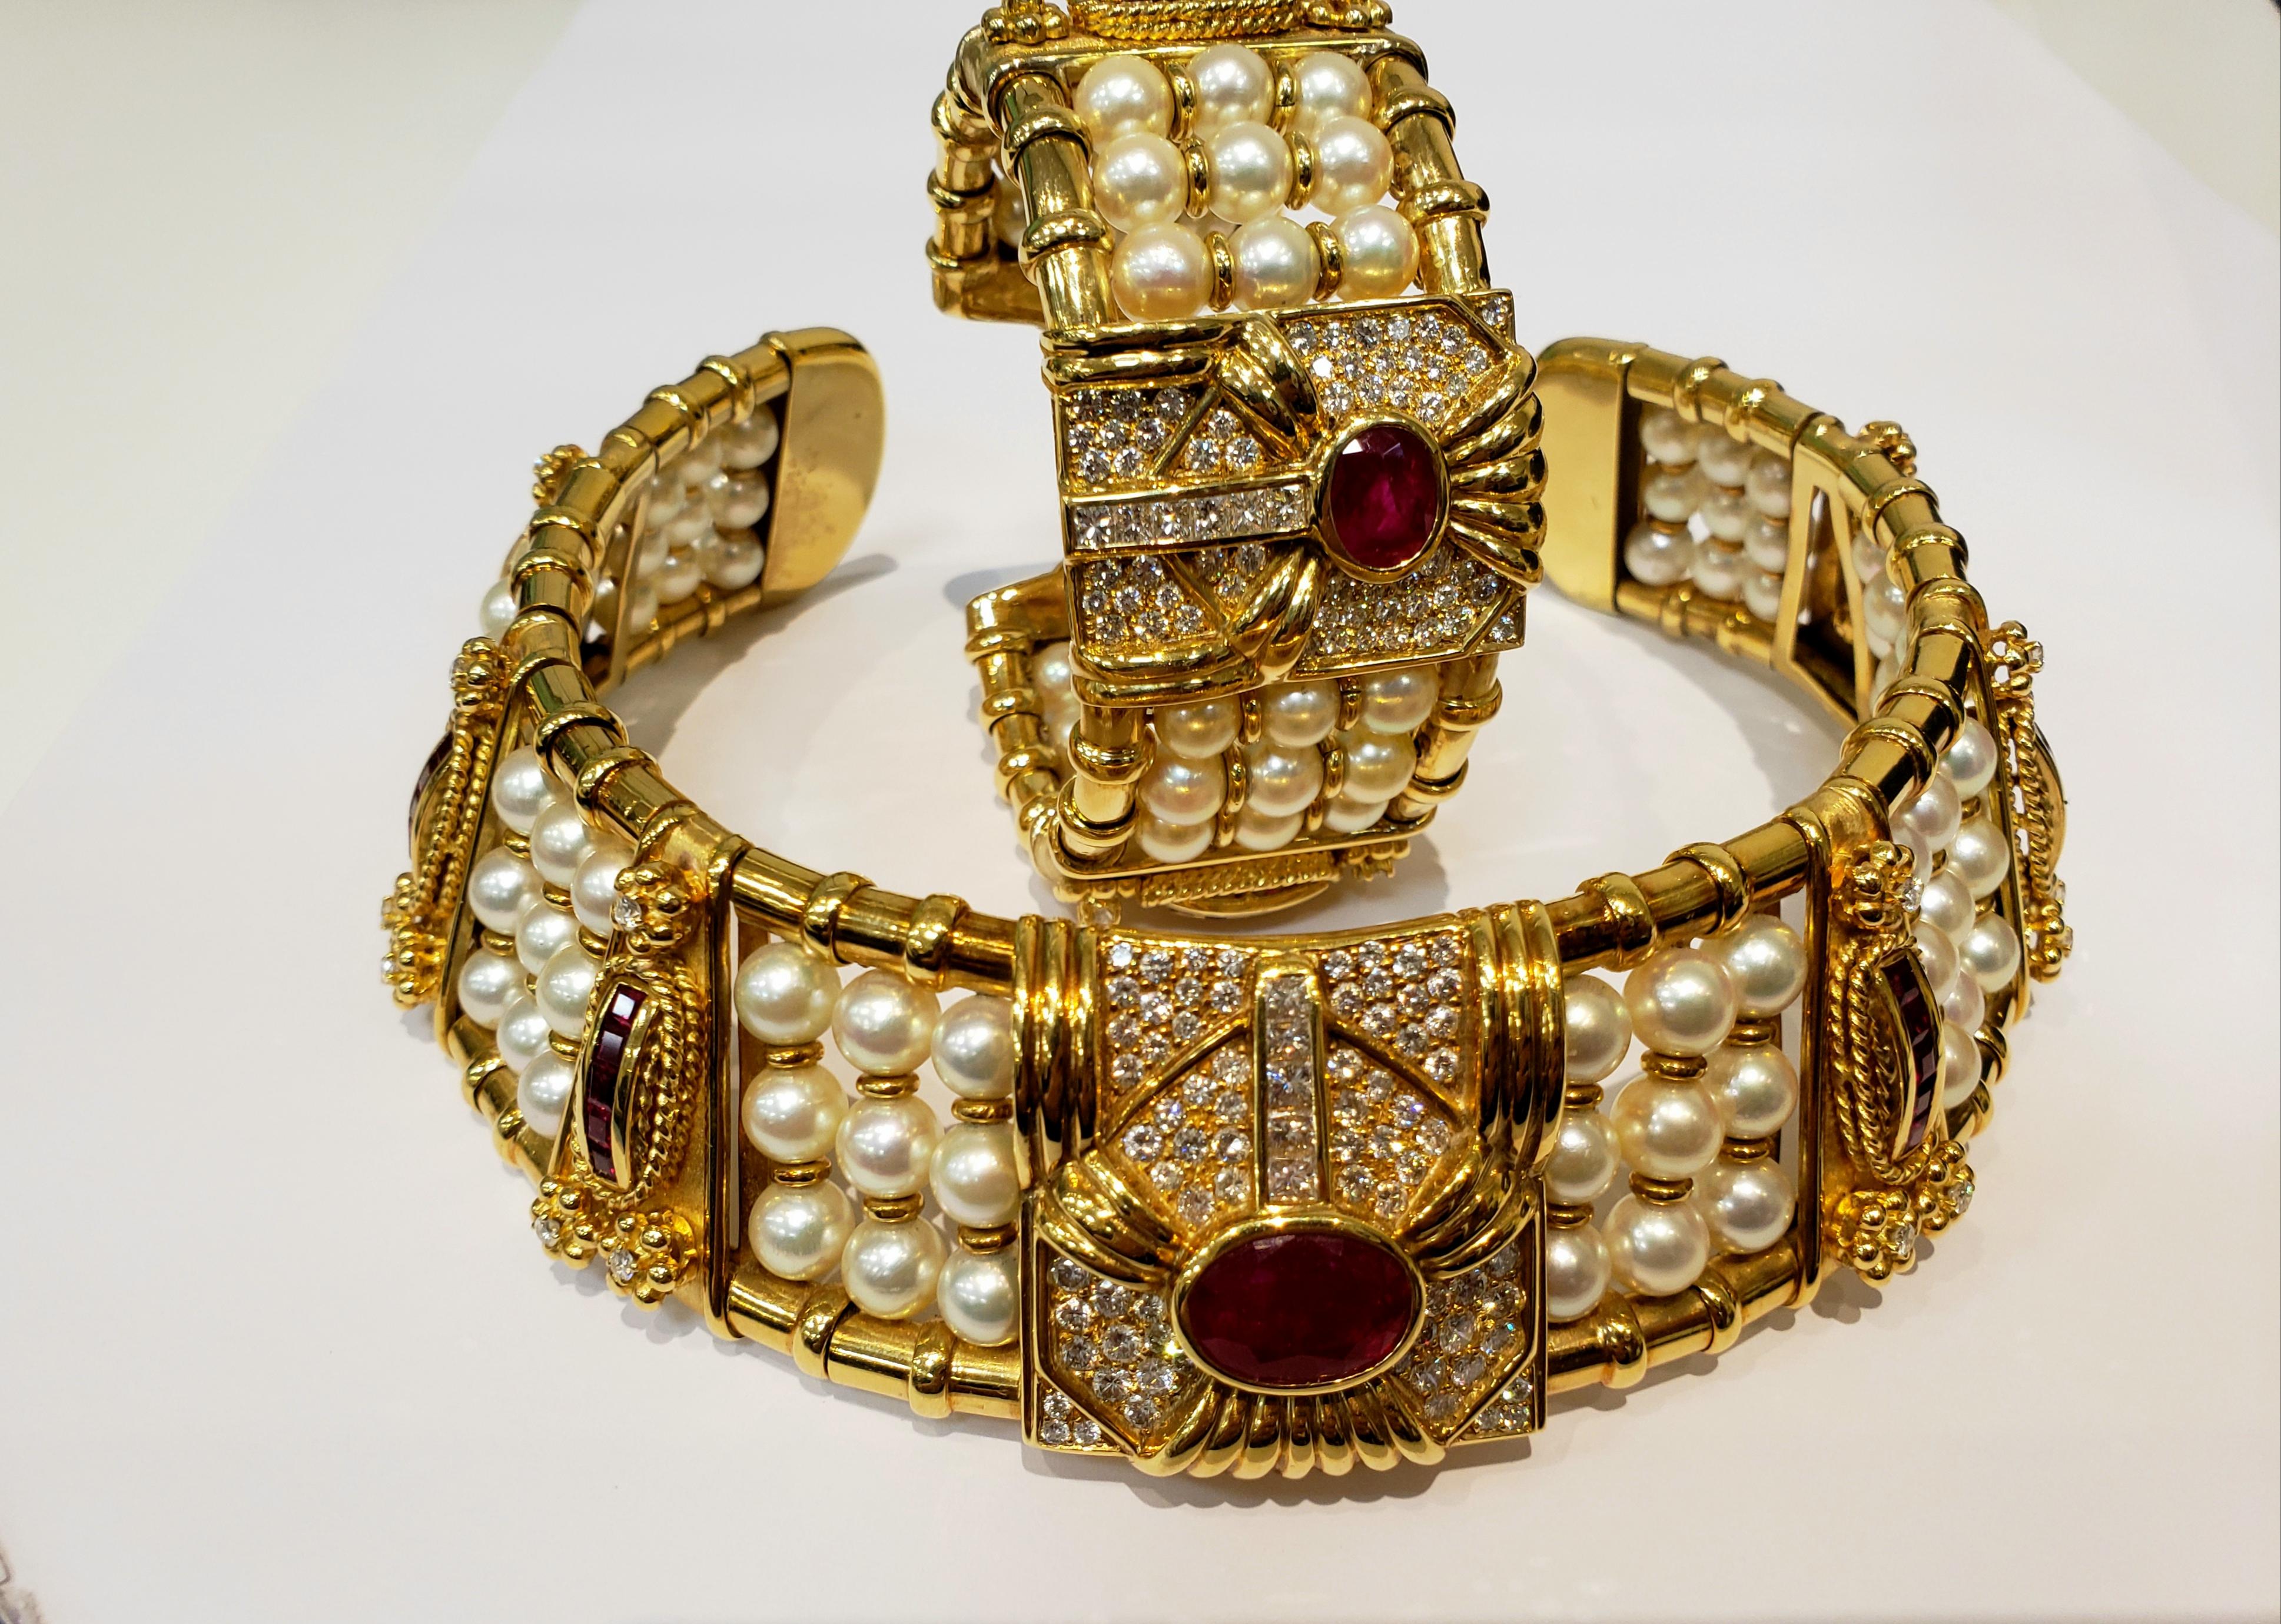 This is a One Of a Kind Tadini Choker & Cuff Bracelet. Choker has 8 Sections, Each With 3 Rows Of 3, 7 Millimeter Pearls.
There Are 6 Gold Sections, With a Vertical Row Of 5 Square Rubies, With 3 Diamond Accents. Center Of Collar Has a Large Diamond